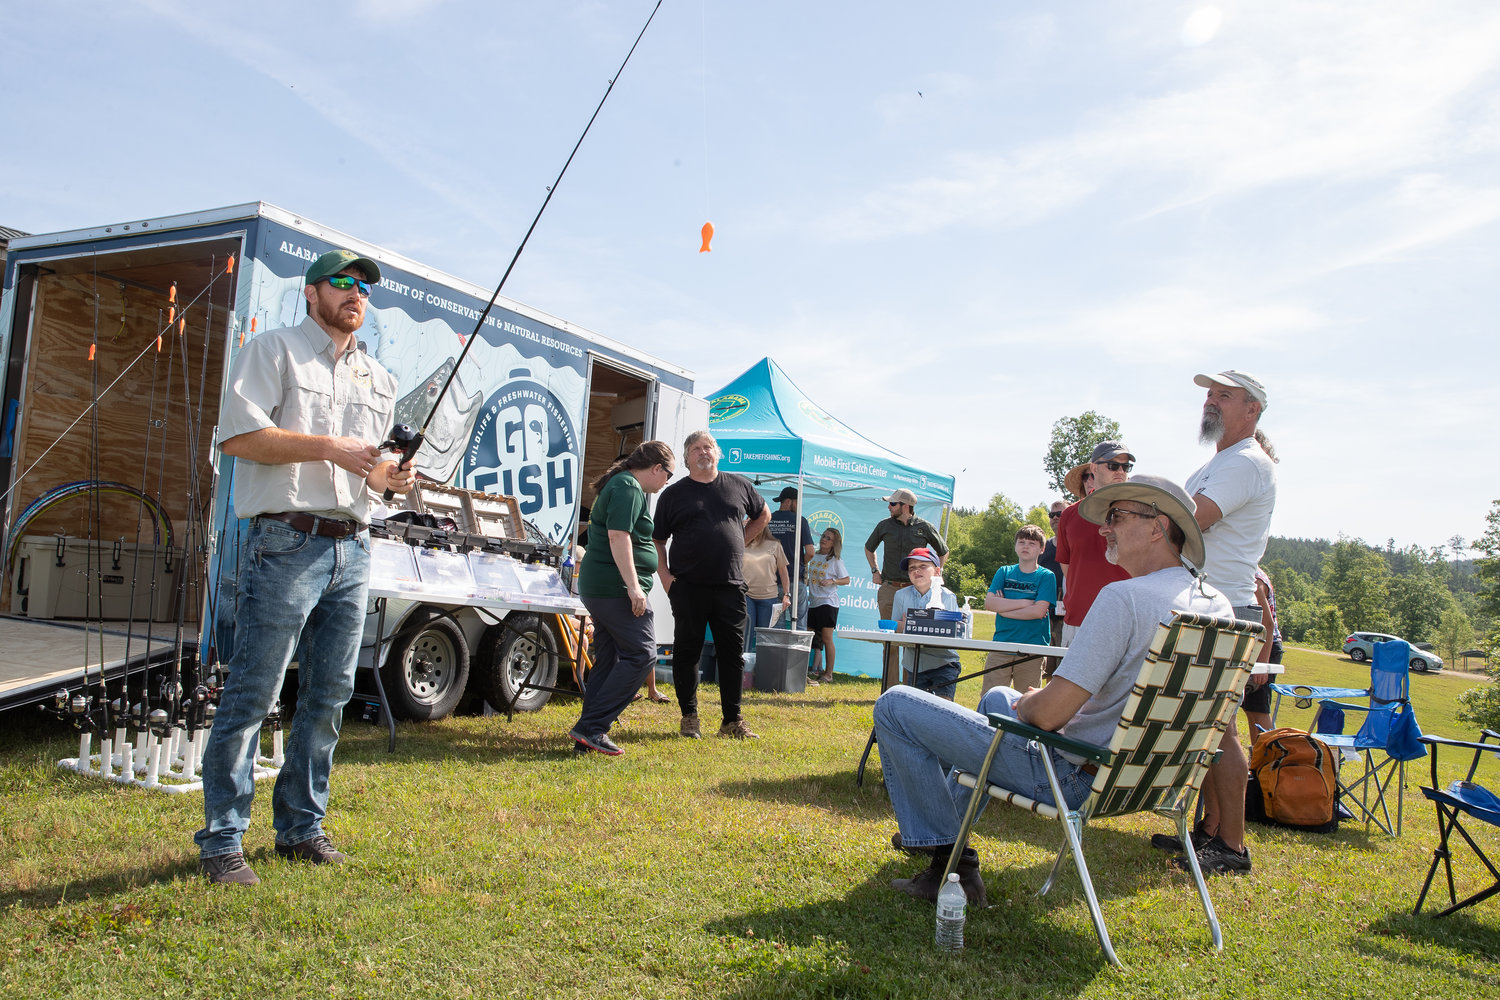 Nathan Aycock of the Alabama Wildlife and Freshwater Fisheries Division demonstrates casting techniques to attendees at the Go Fish, Alabama! event at Bibb County Lake.